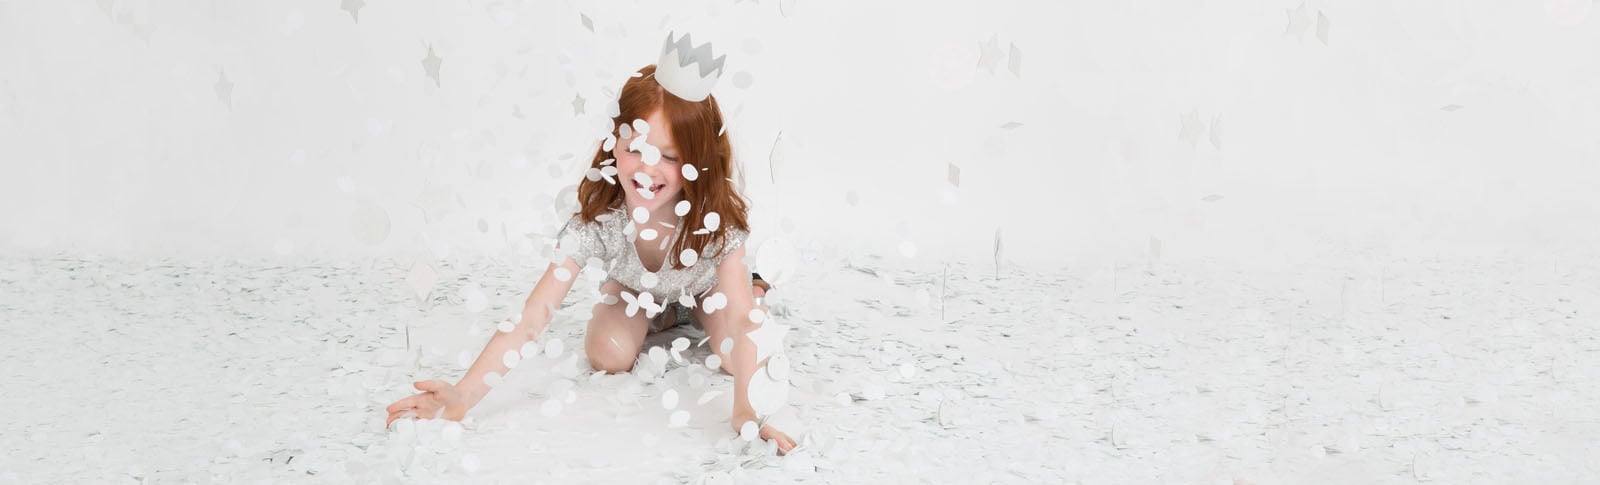 Tips and ideas for a snow queen-themed child's birthday party